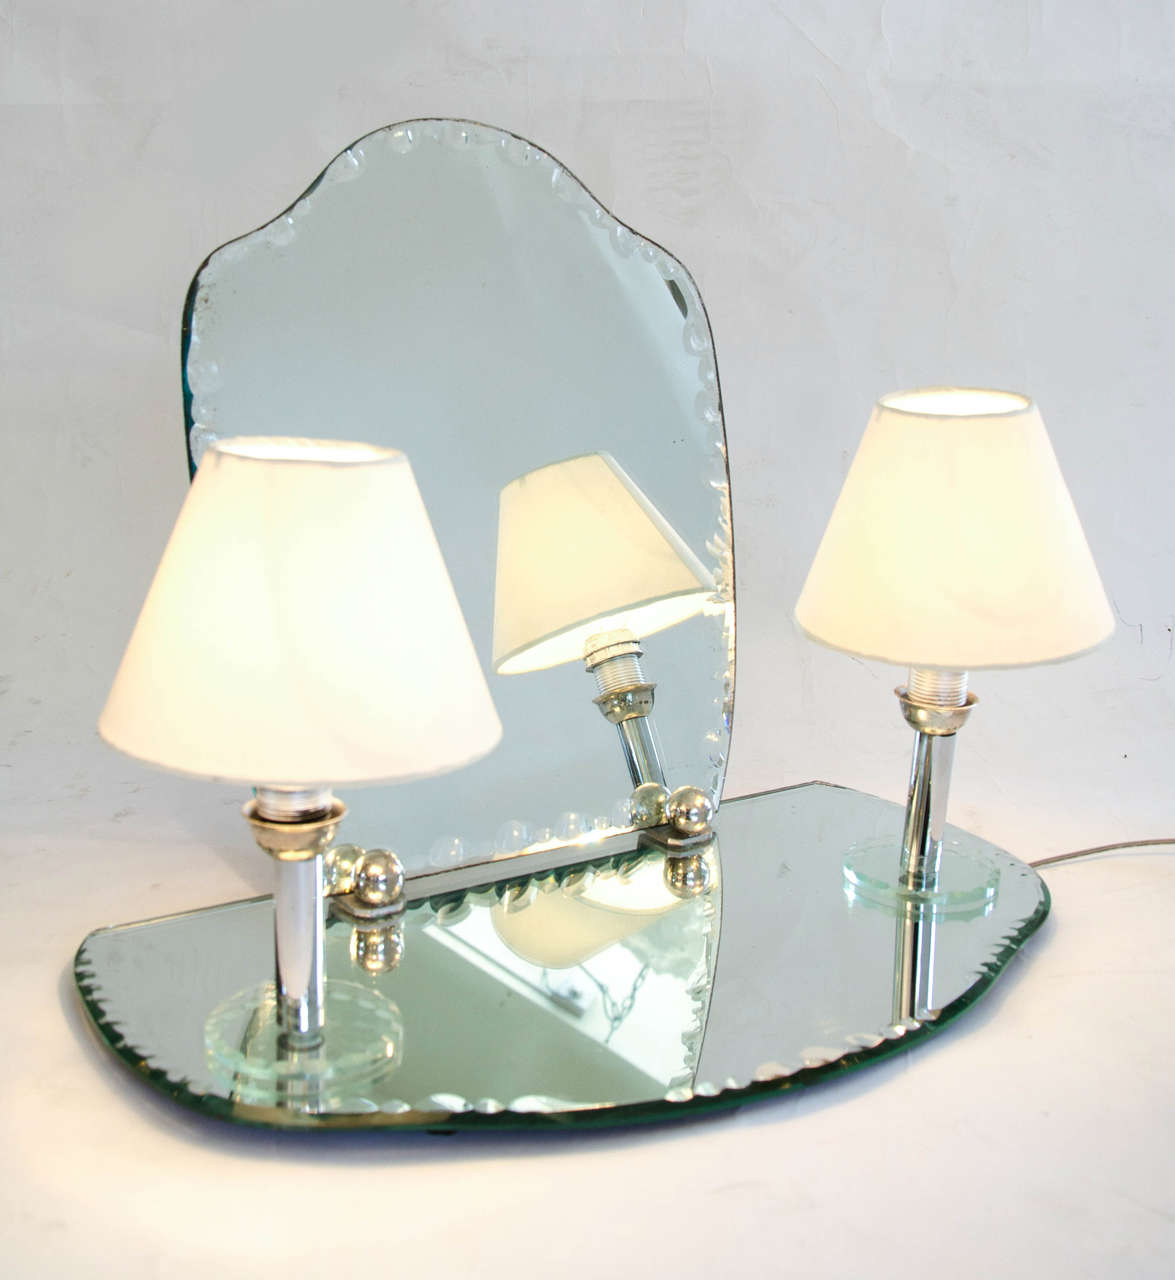 Romantic dressing table mirror with integral 'candle' lights on chrome stems. Mirror and semi-circular tray have 